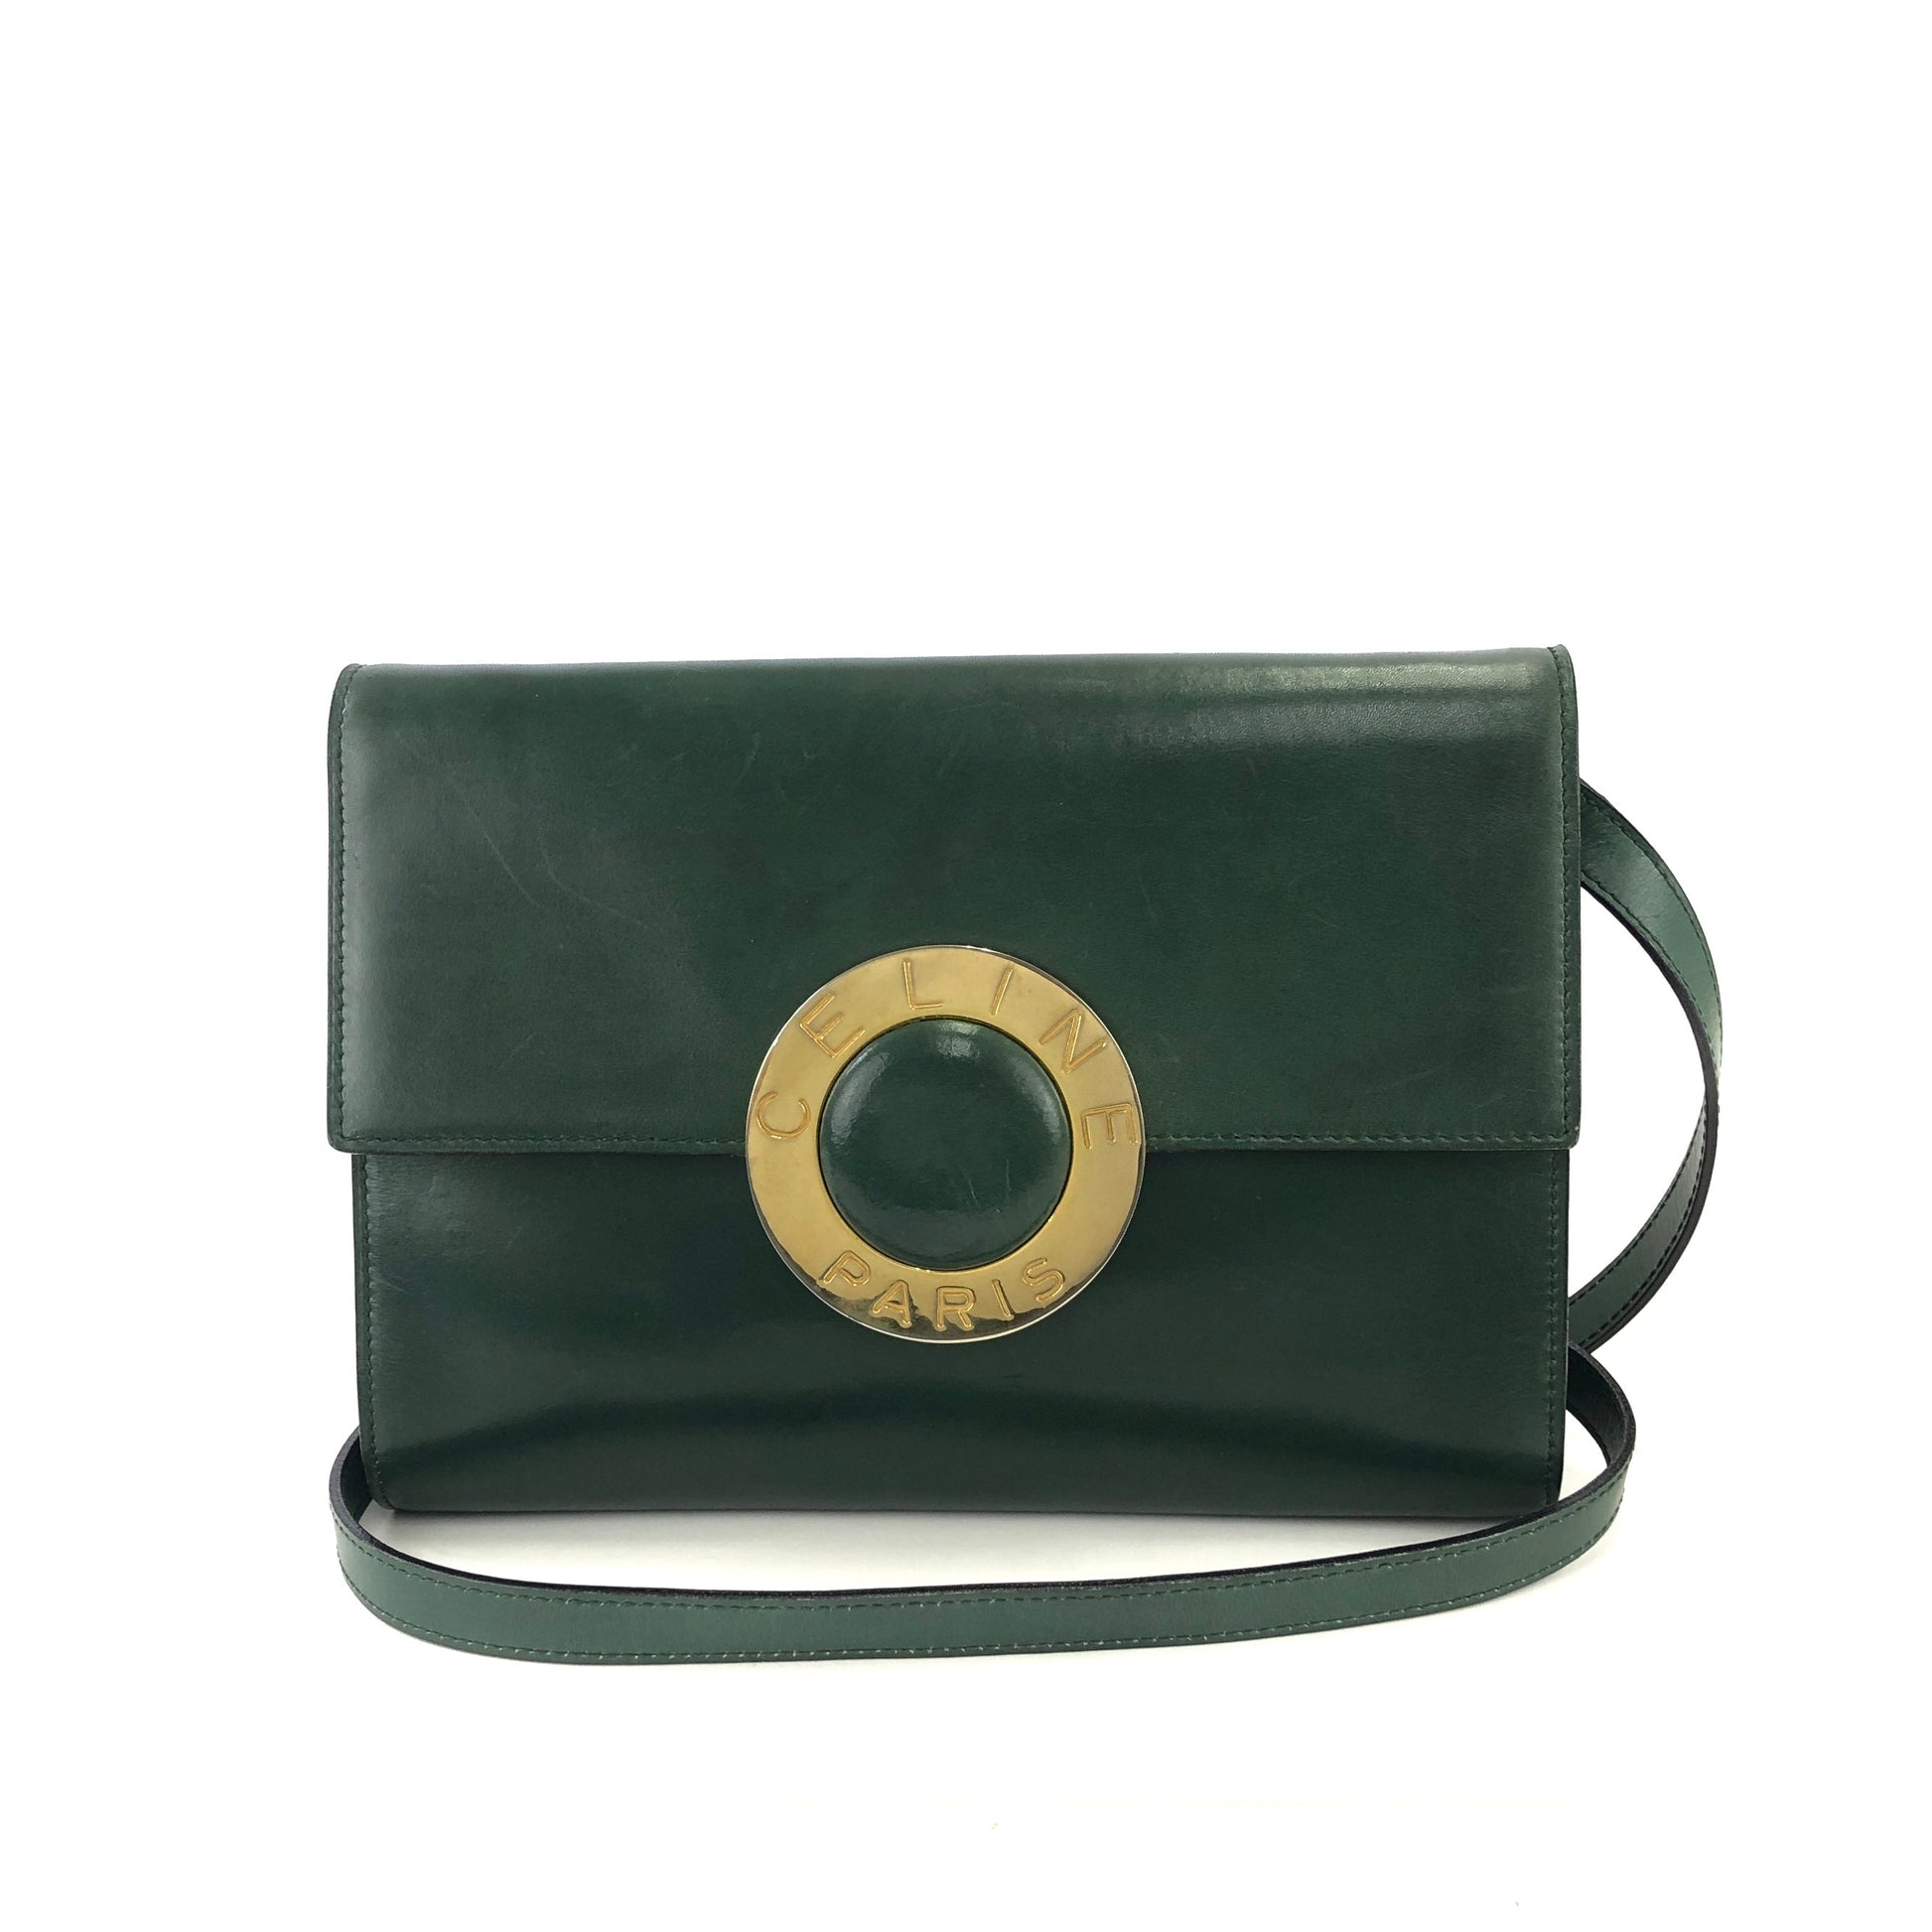 Frame leather clutch bag Celine Green in Leather - 12656691